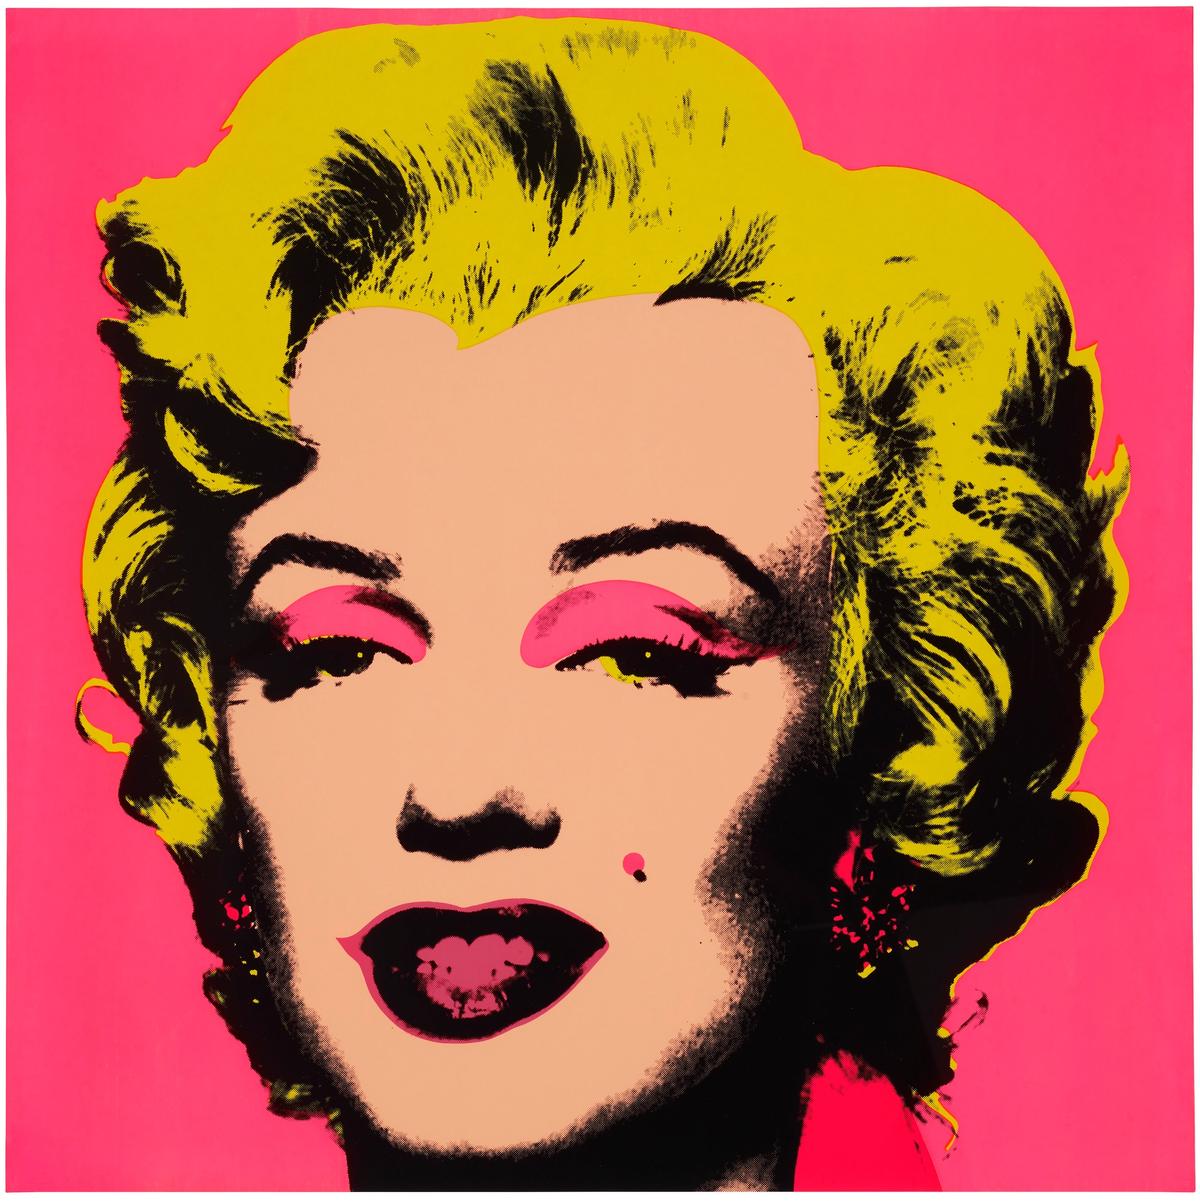 Christie's bidders will be able to use Art Money financing to pay for this Andy Warhol print of Marilyn Monroe, on sale at the auction house next week Courtesy Christie's